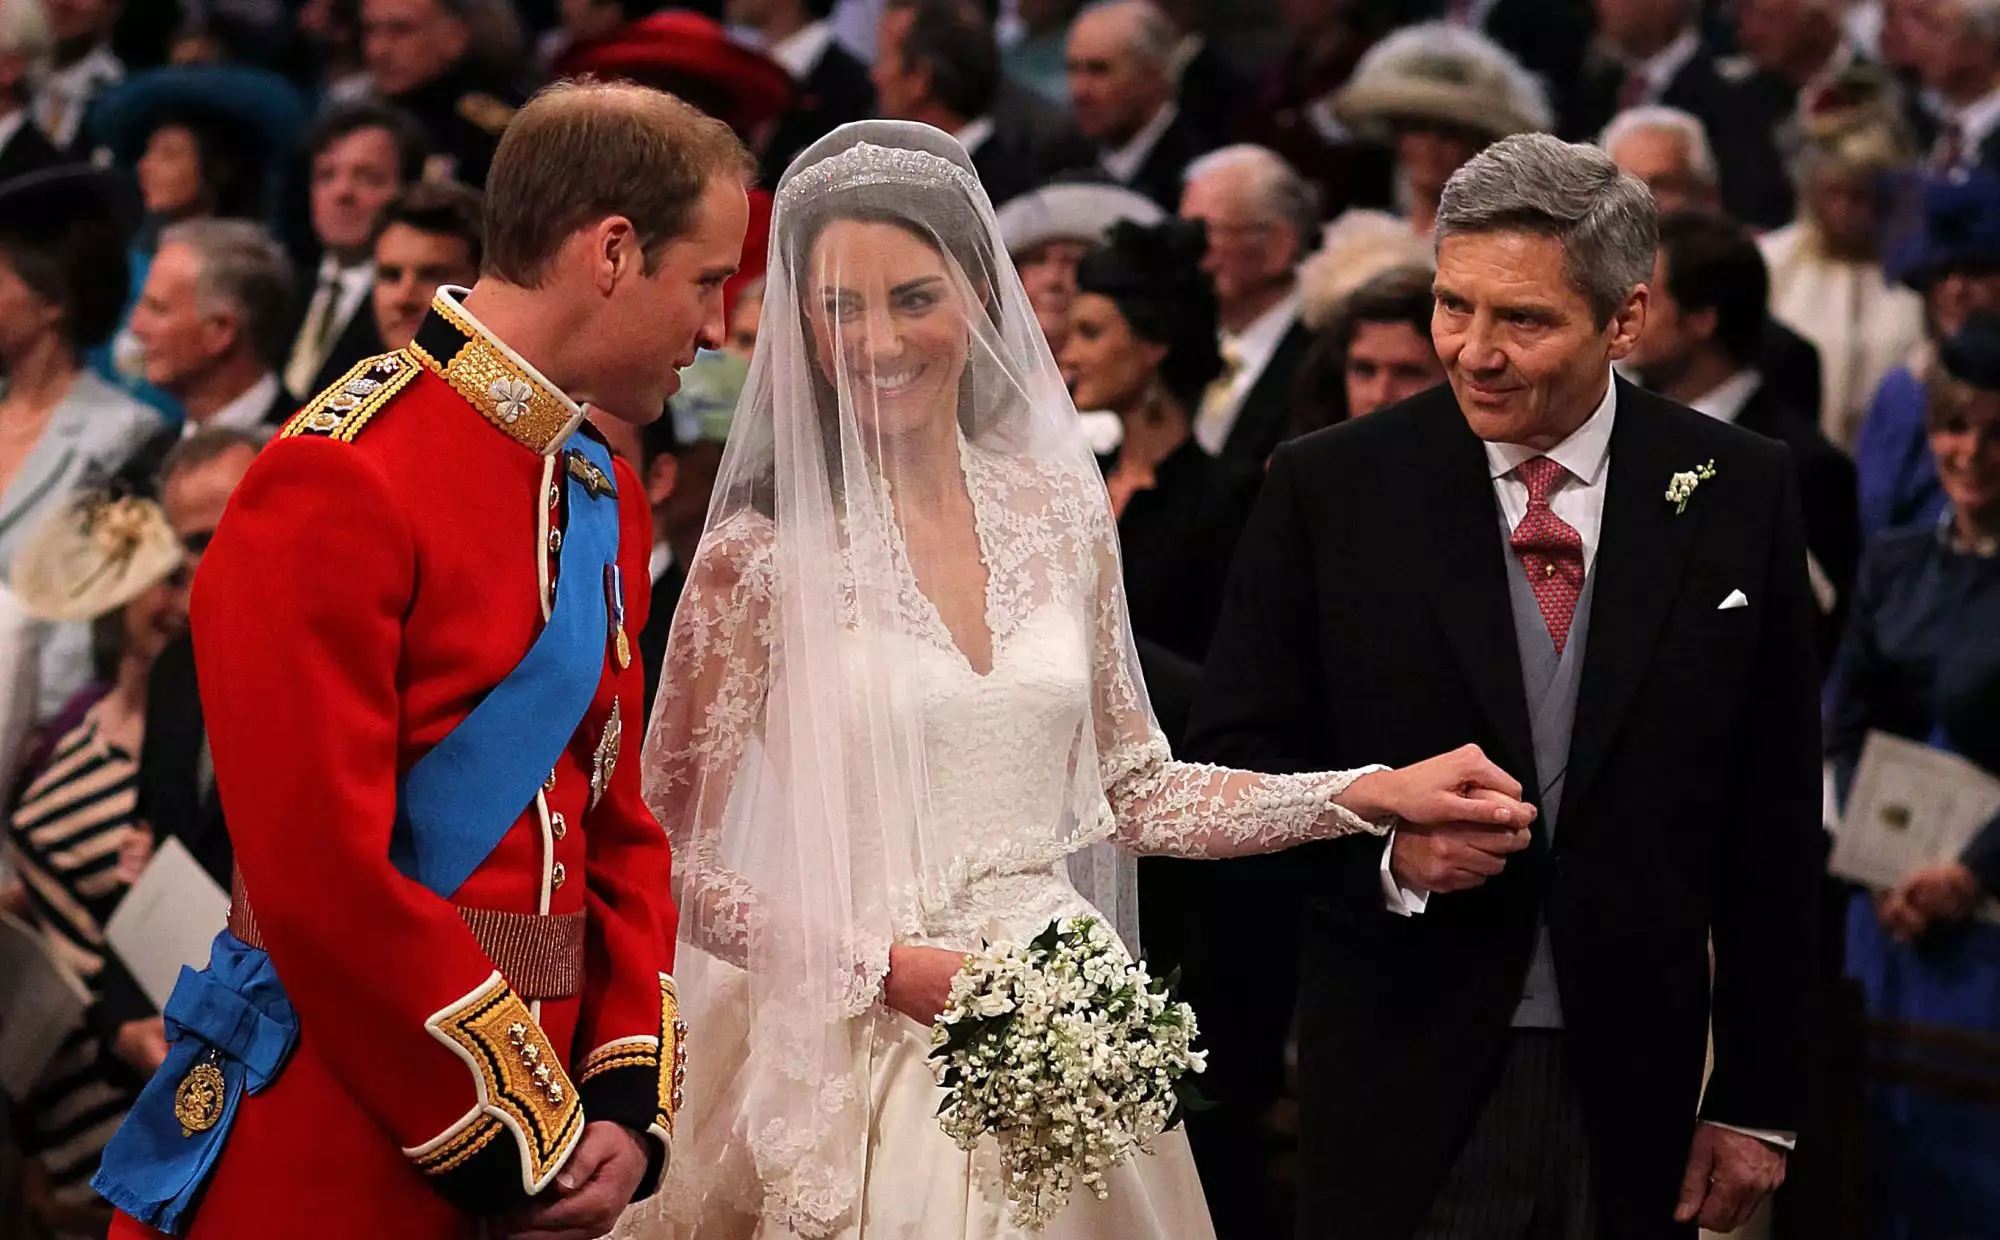 Her parents paid for Kate Middleton's wedding dress